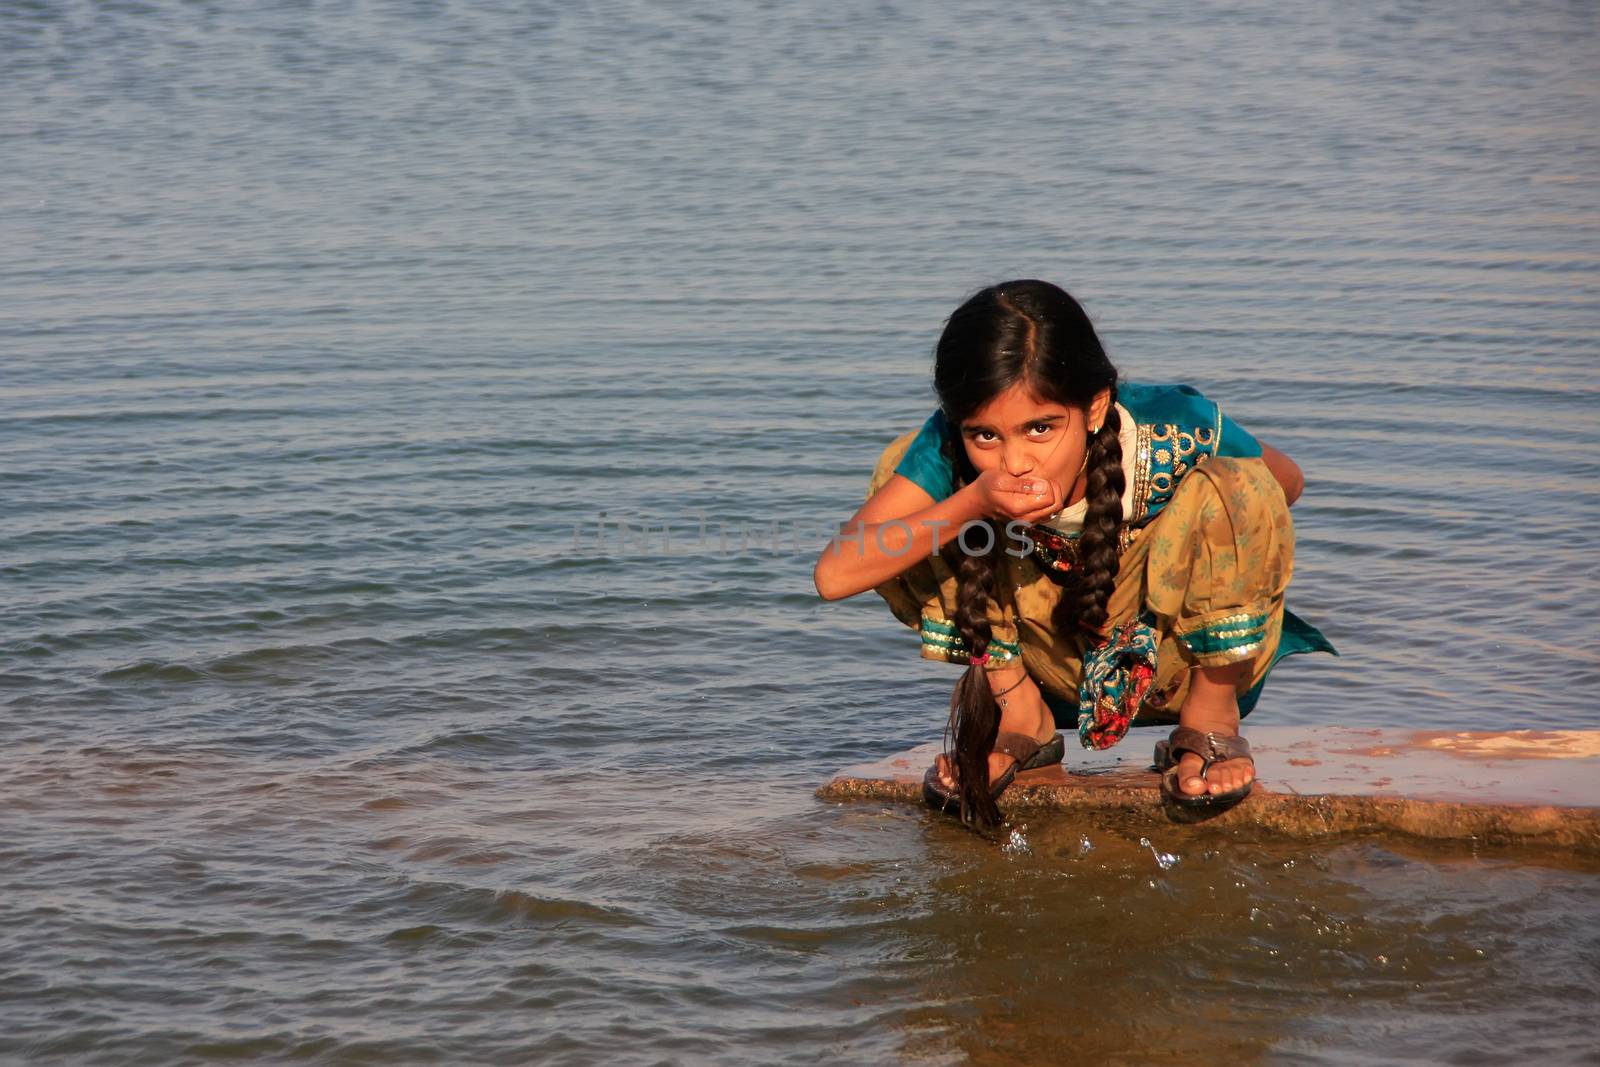 Local girl drinking from water reservoir, Khichan village, India by donya_nedomam